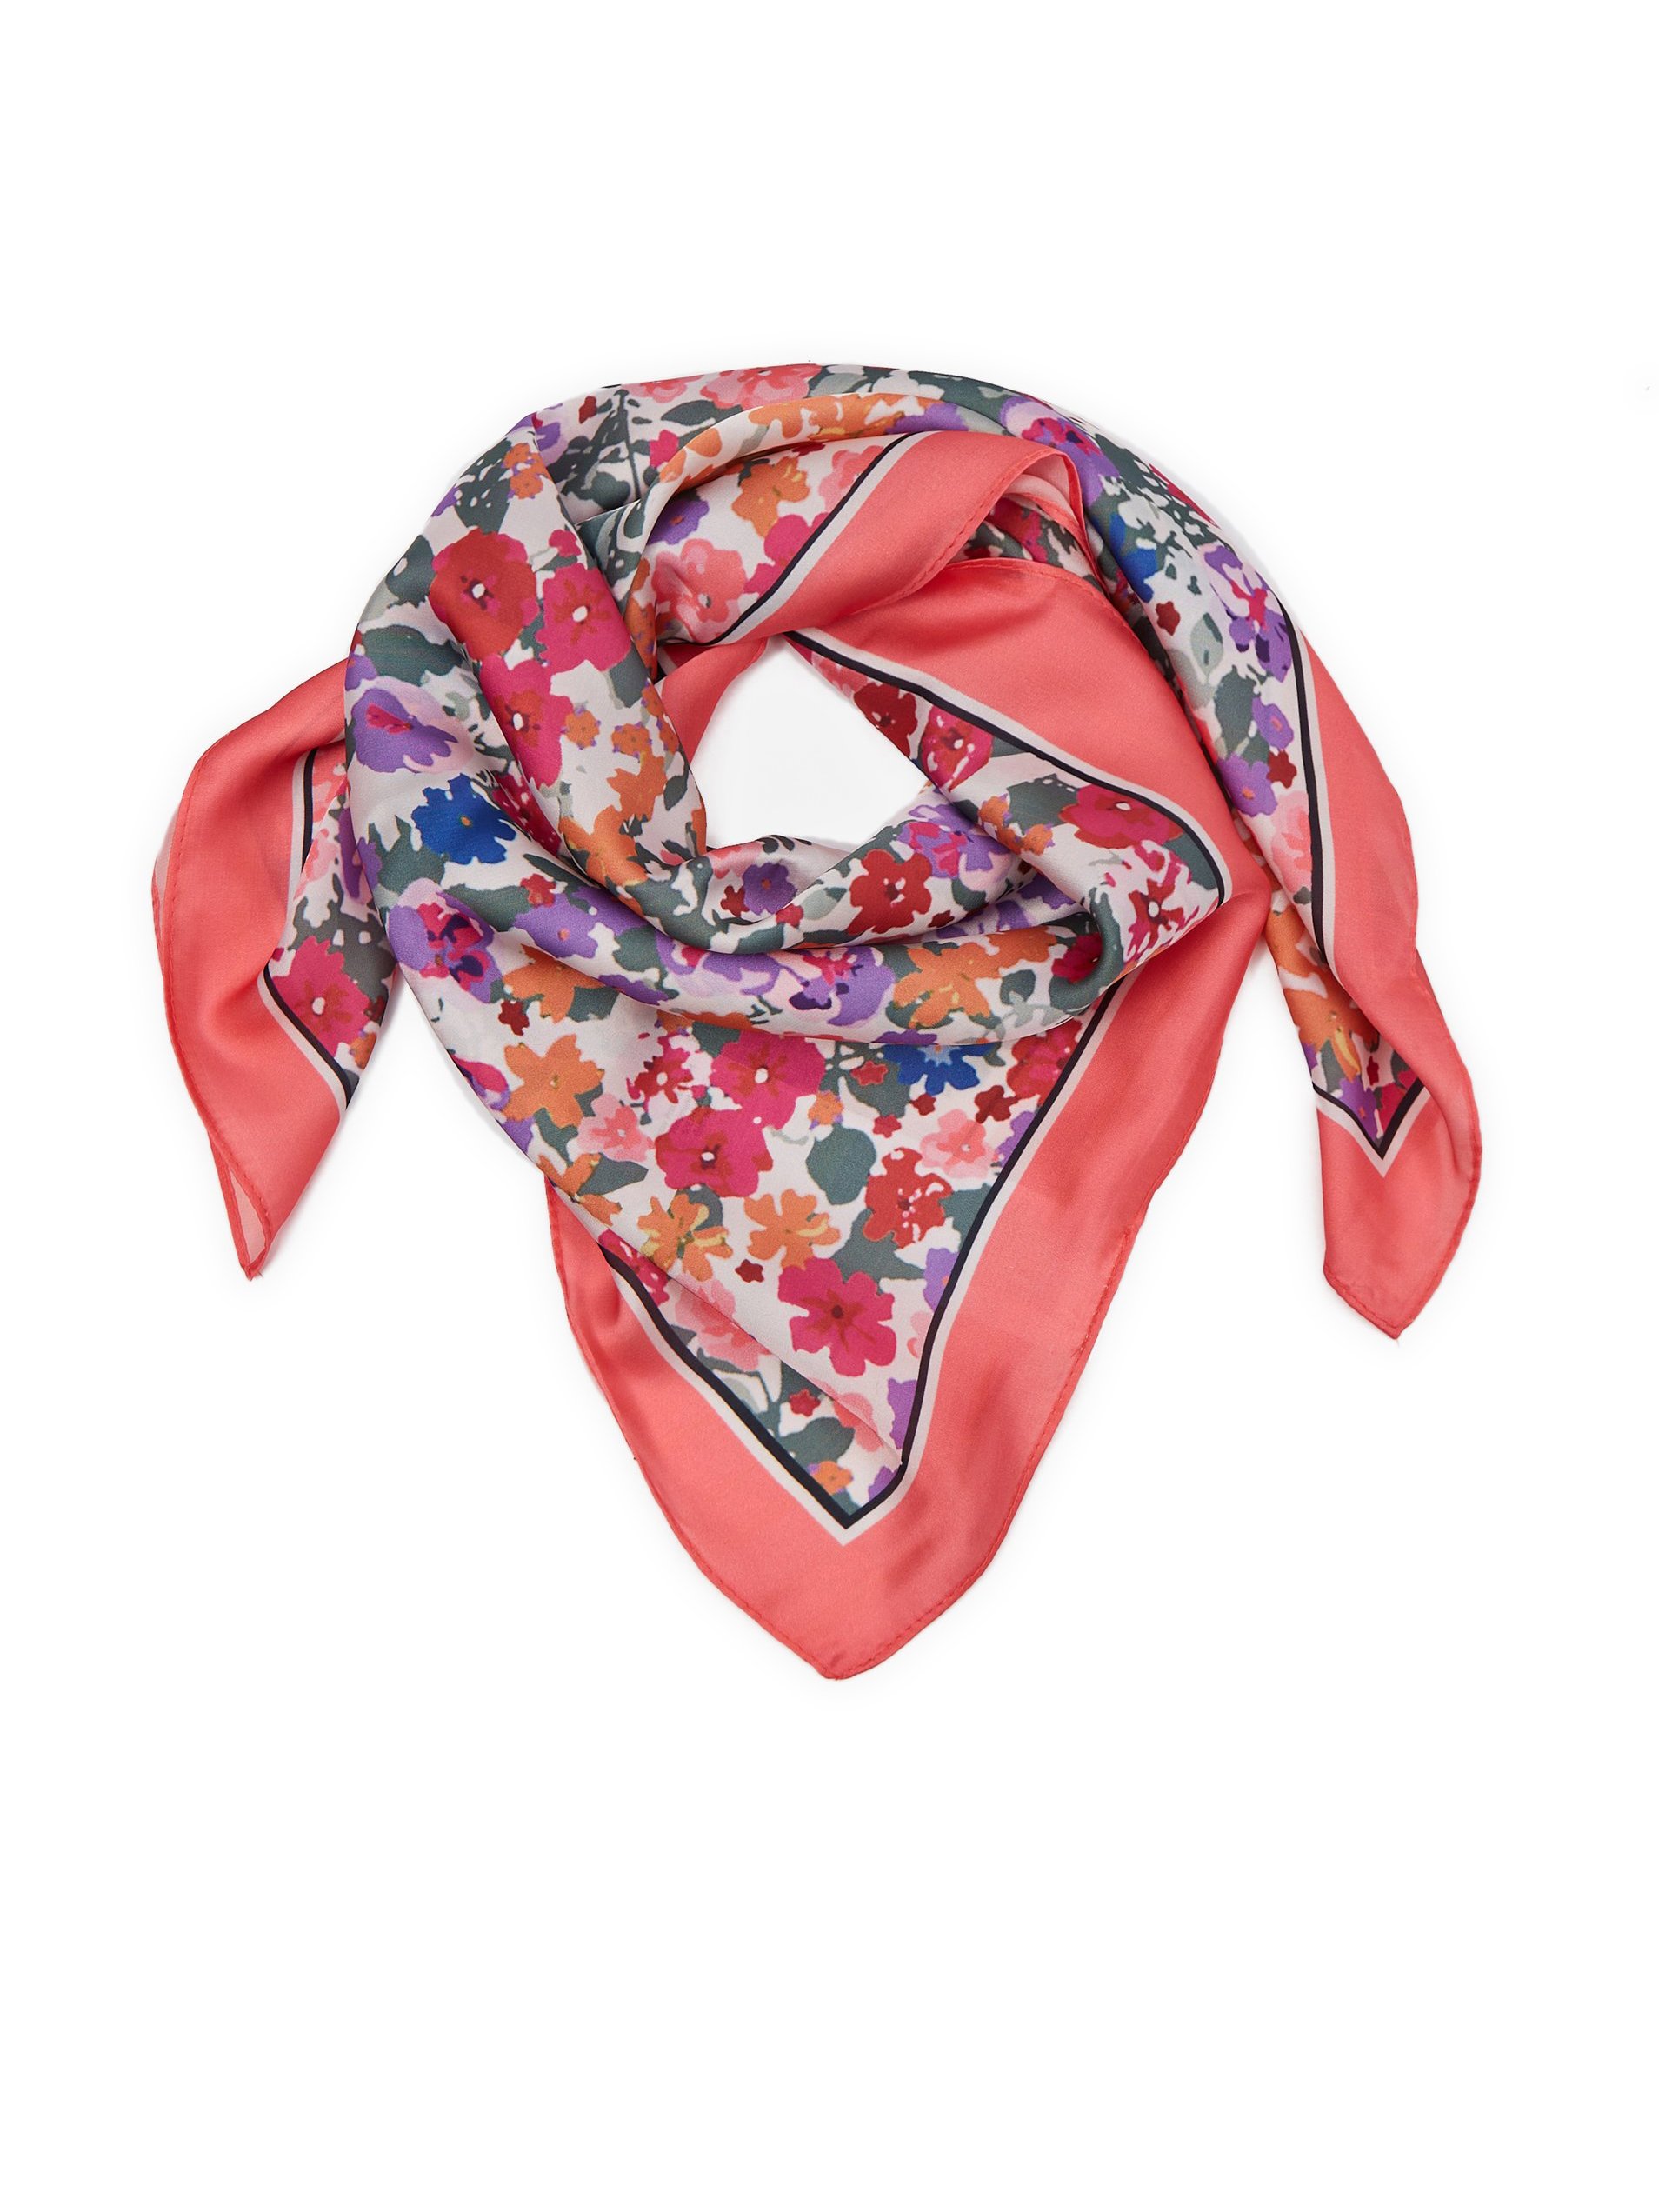 Orsay Coral Women's Floral Satin Scarf - Women